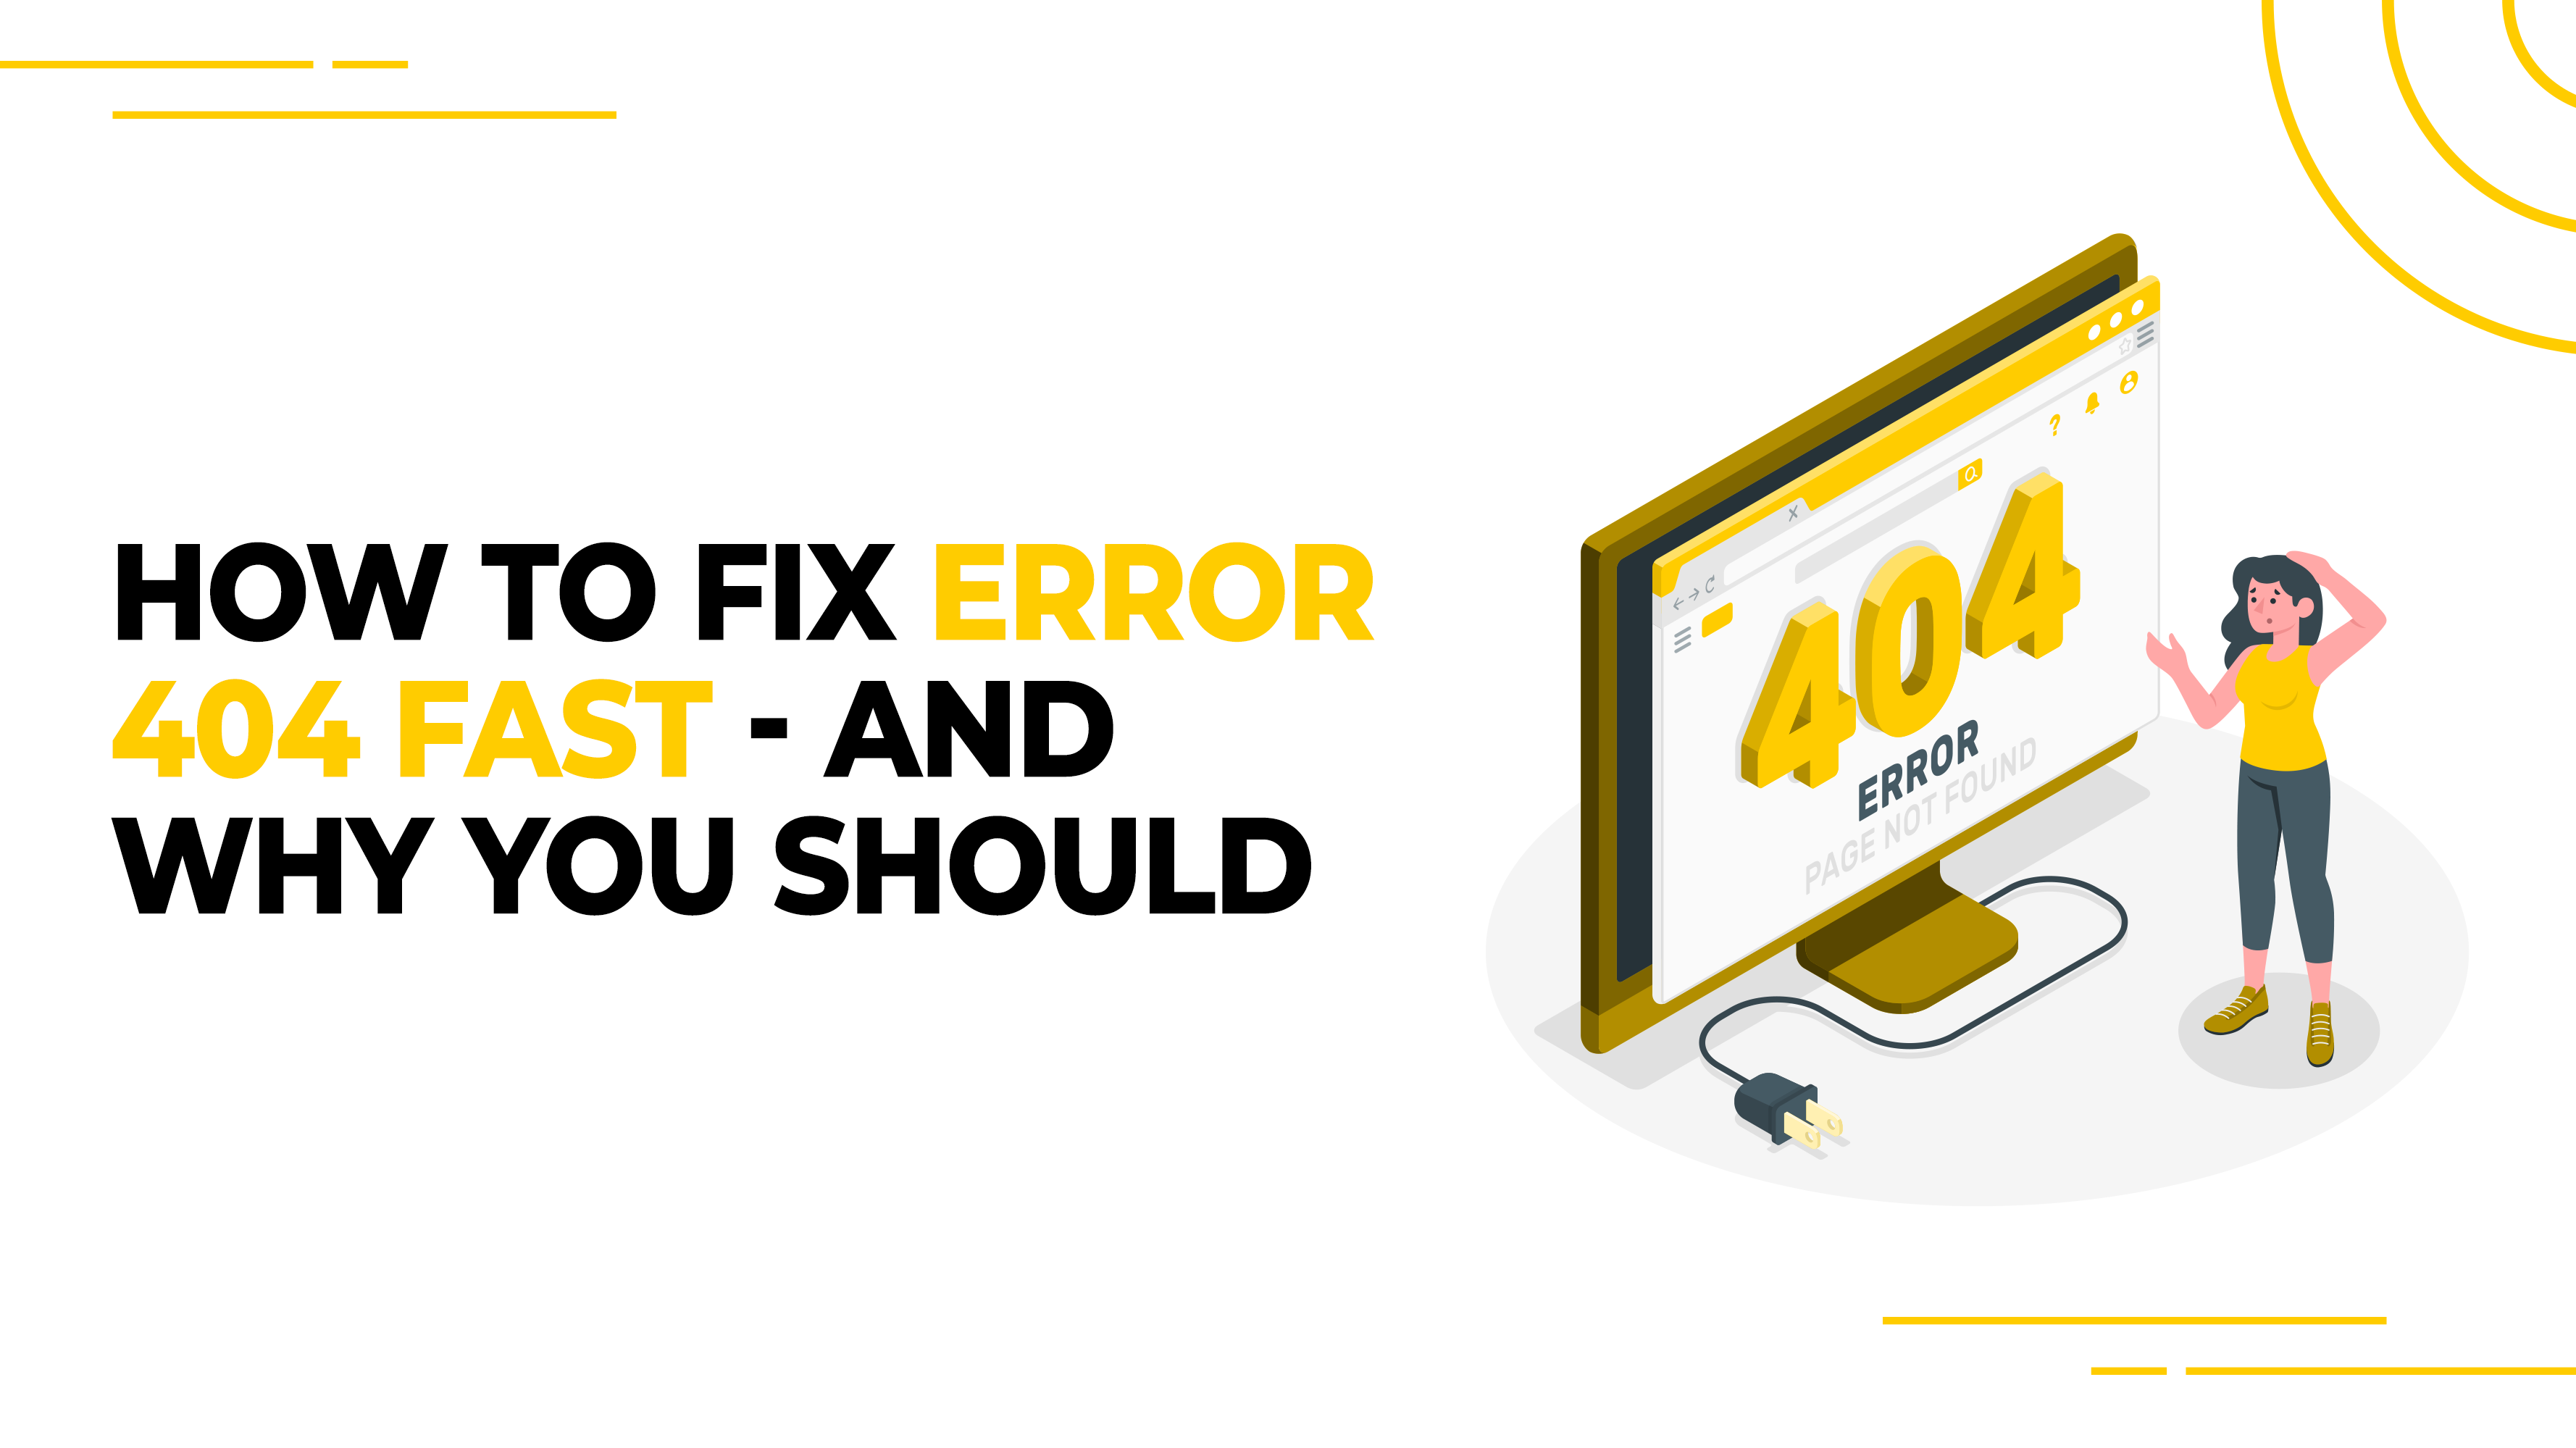 How to fix error 404 fast and why you should